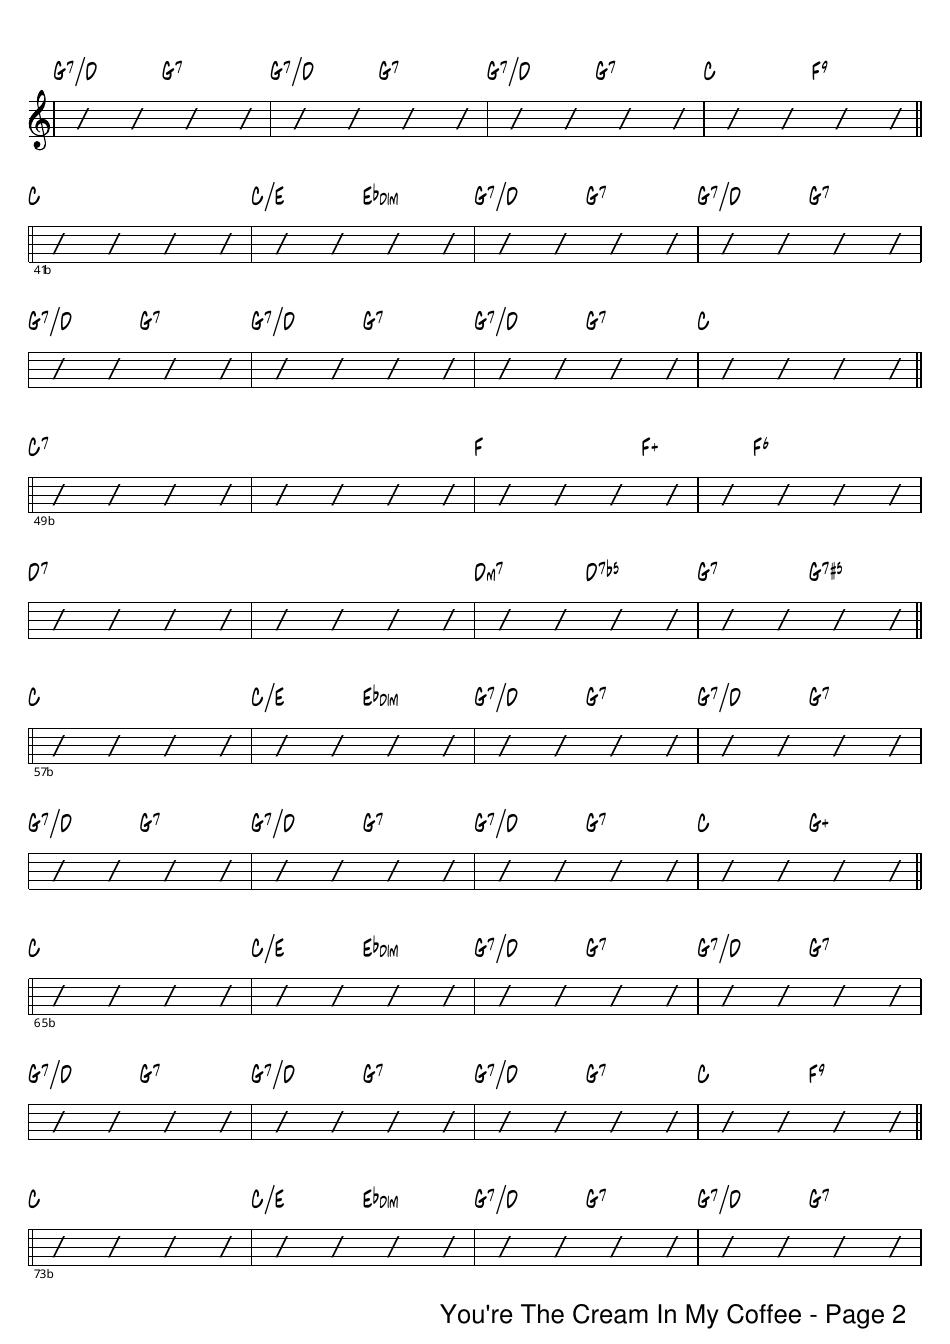 Youre The Cream In My Coffee Sheet Music Download Printable Pdf Templateroller 